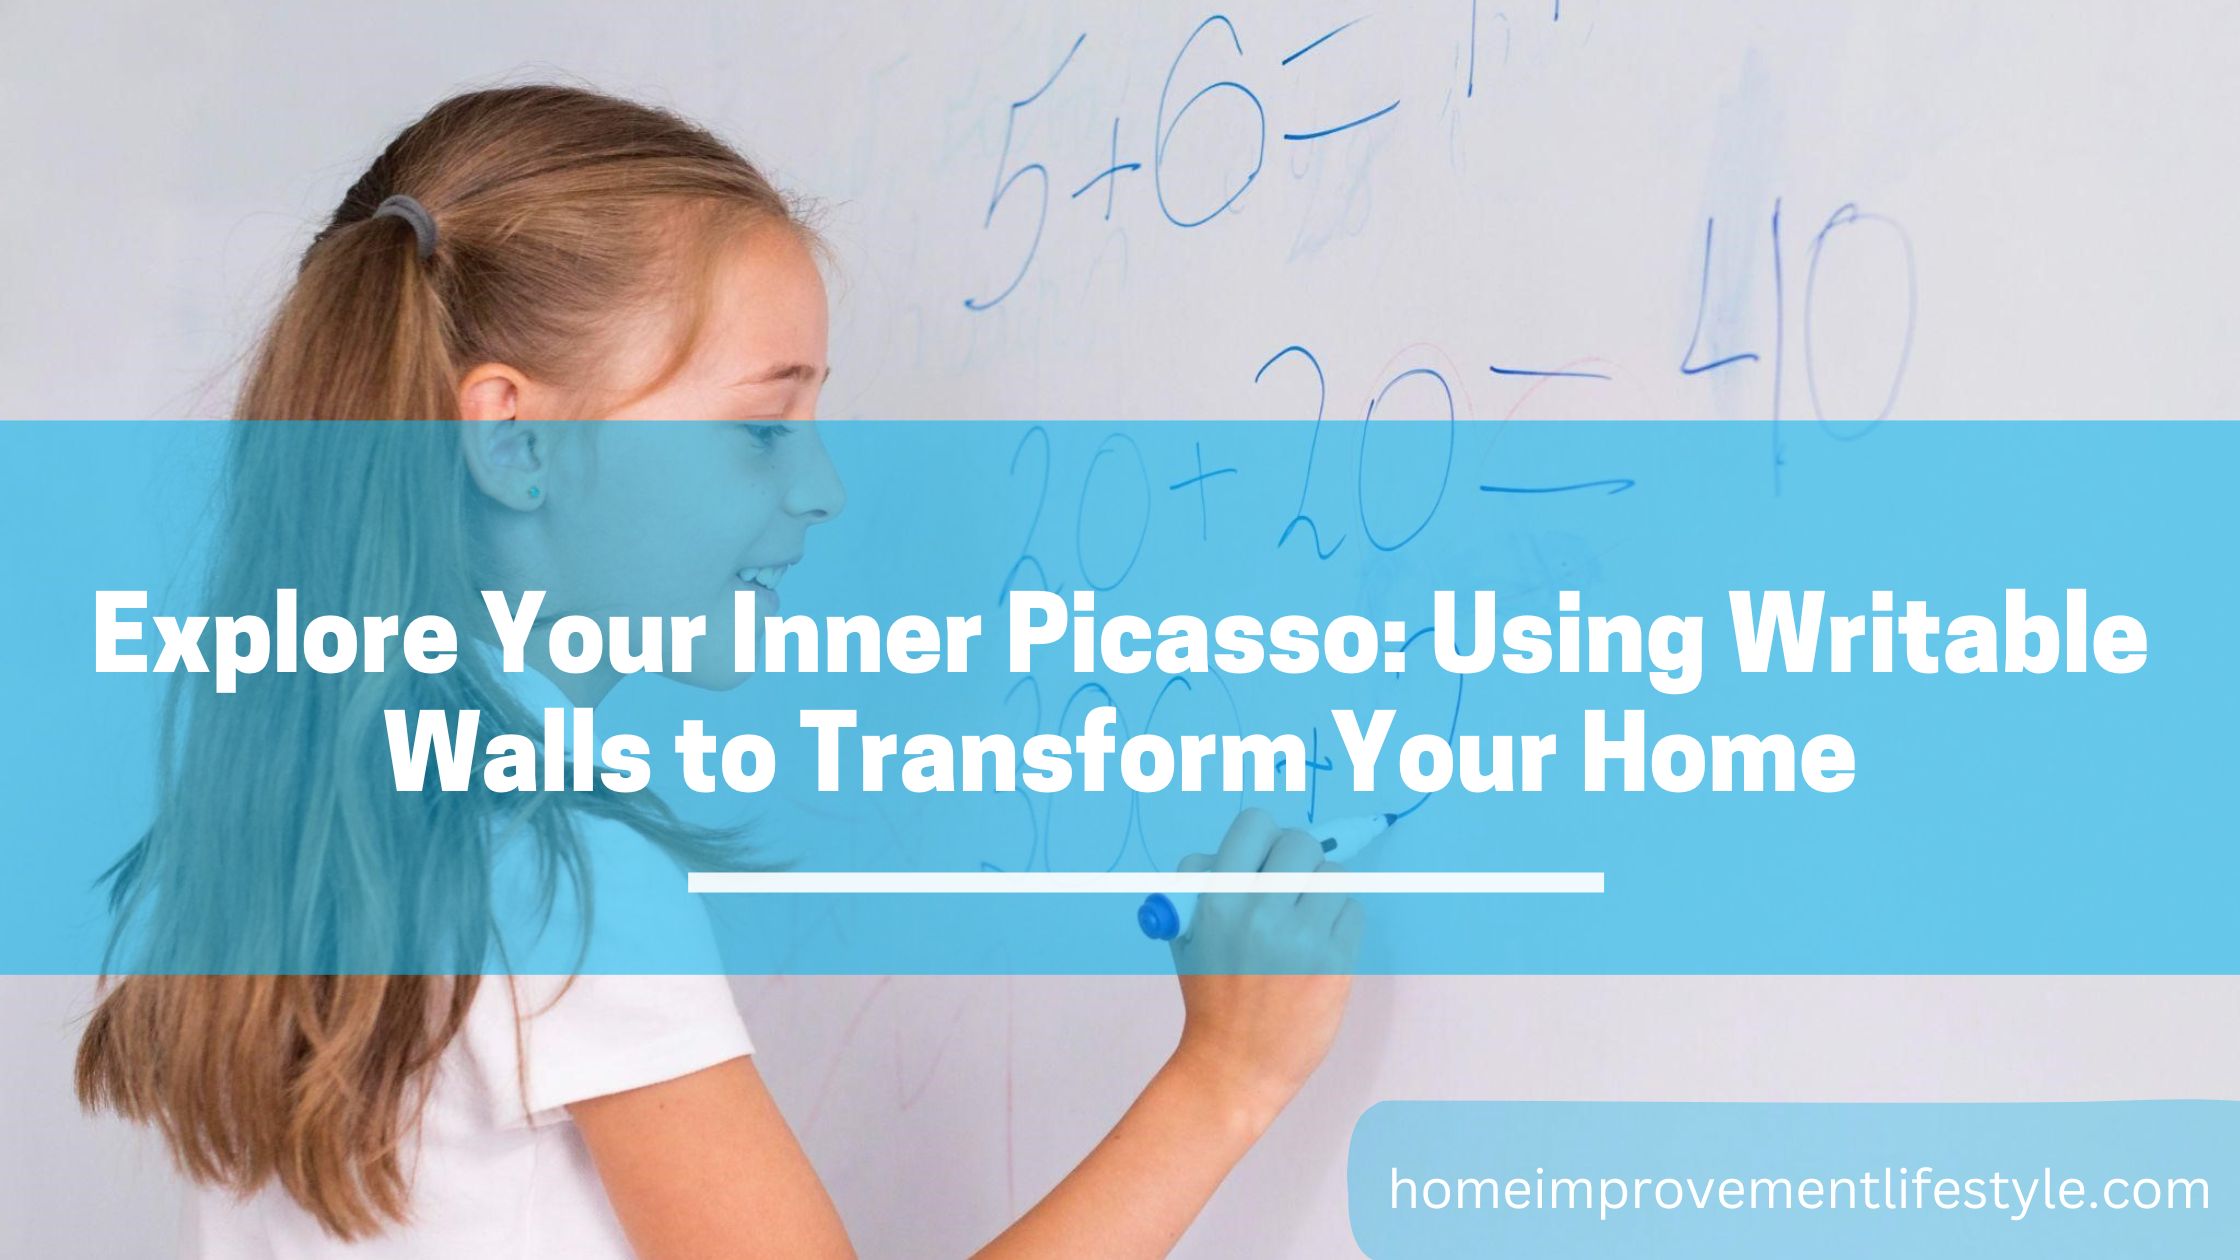 Using Writable Walls to Transform Your Home